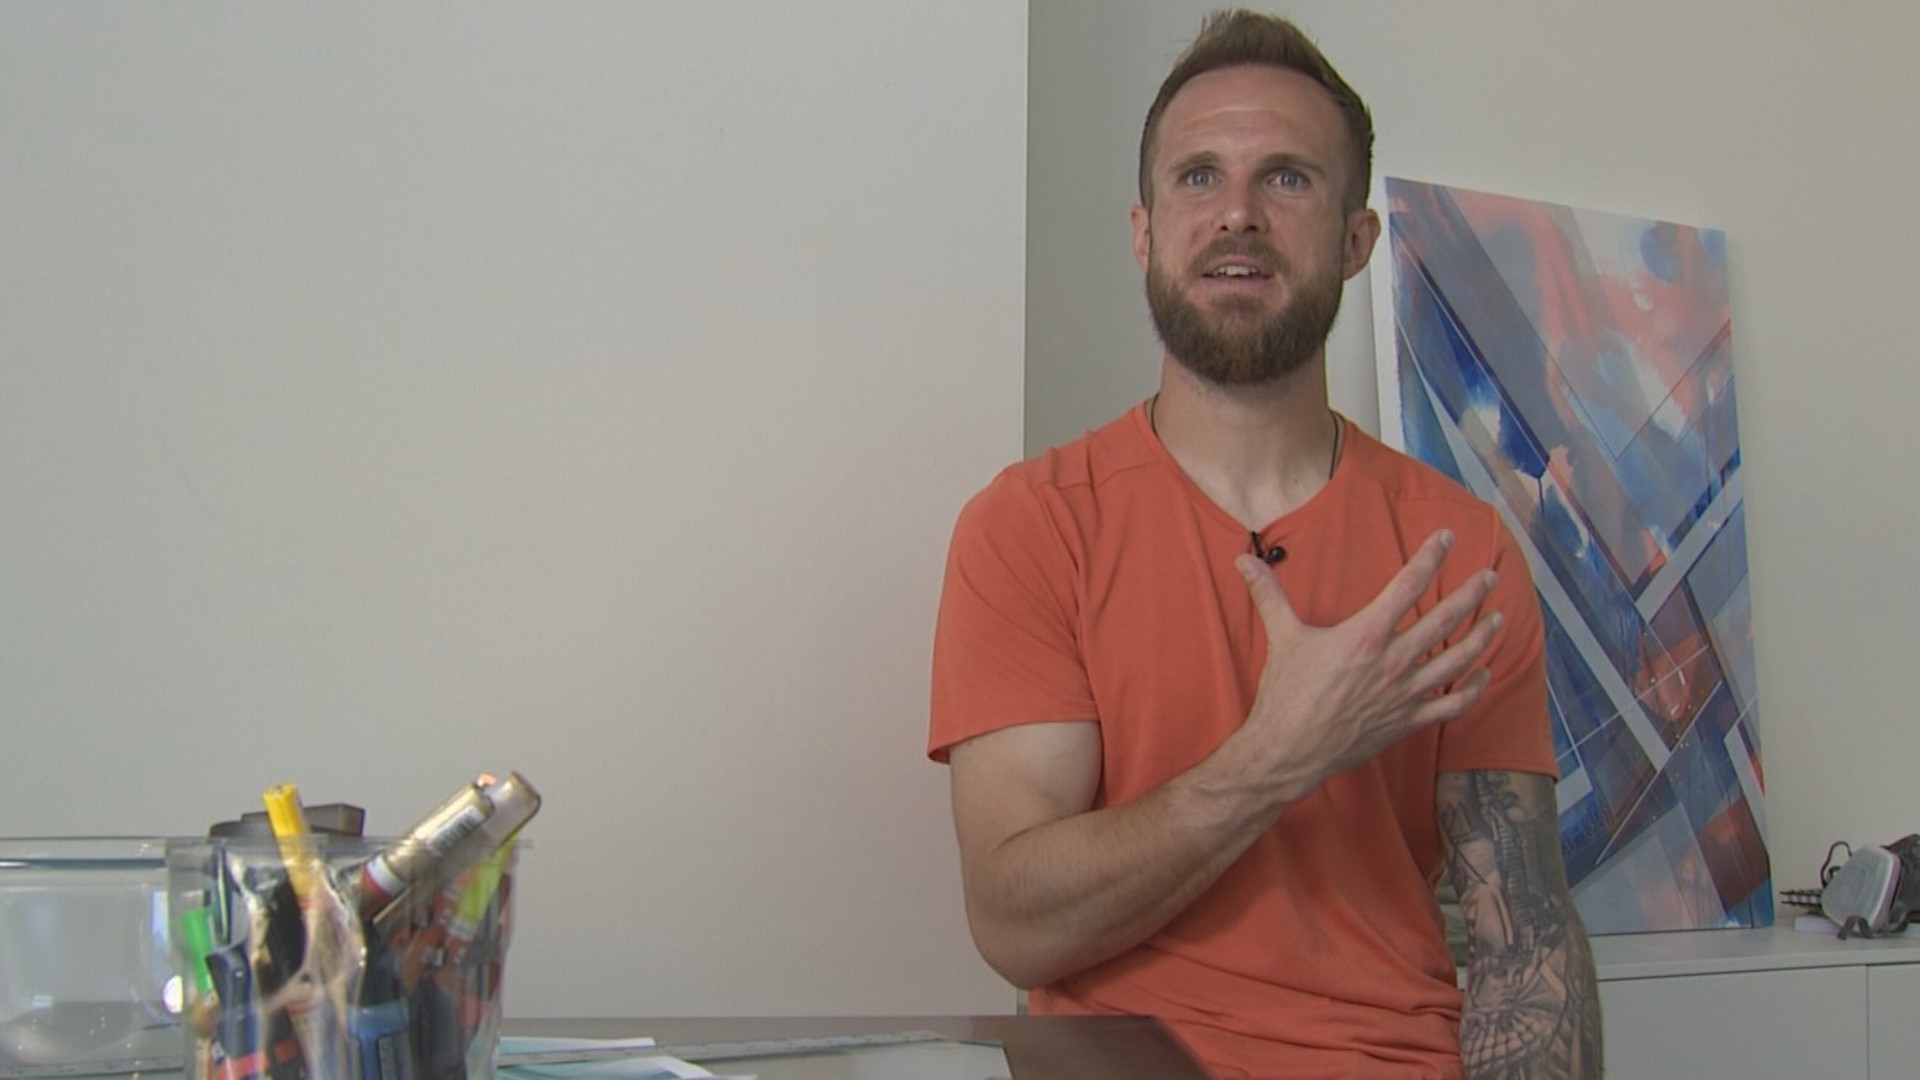 Swiss goalie makes his art available to the public